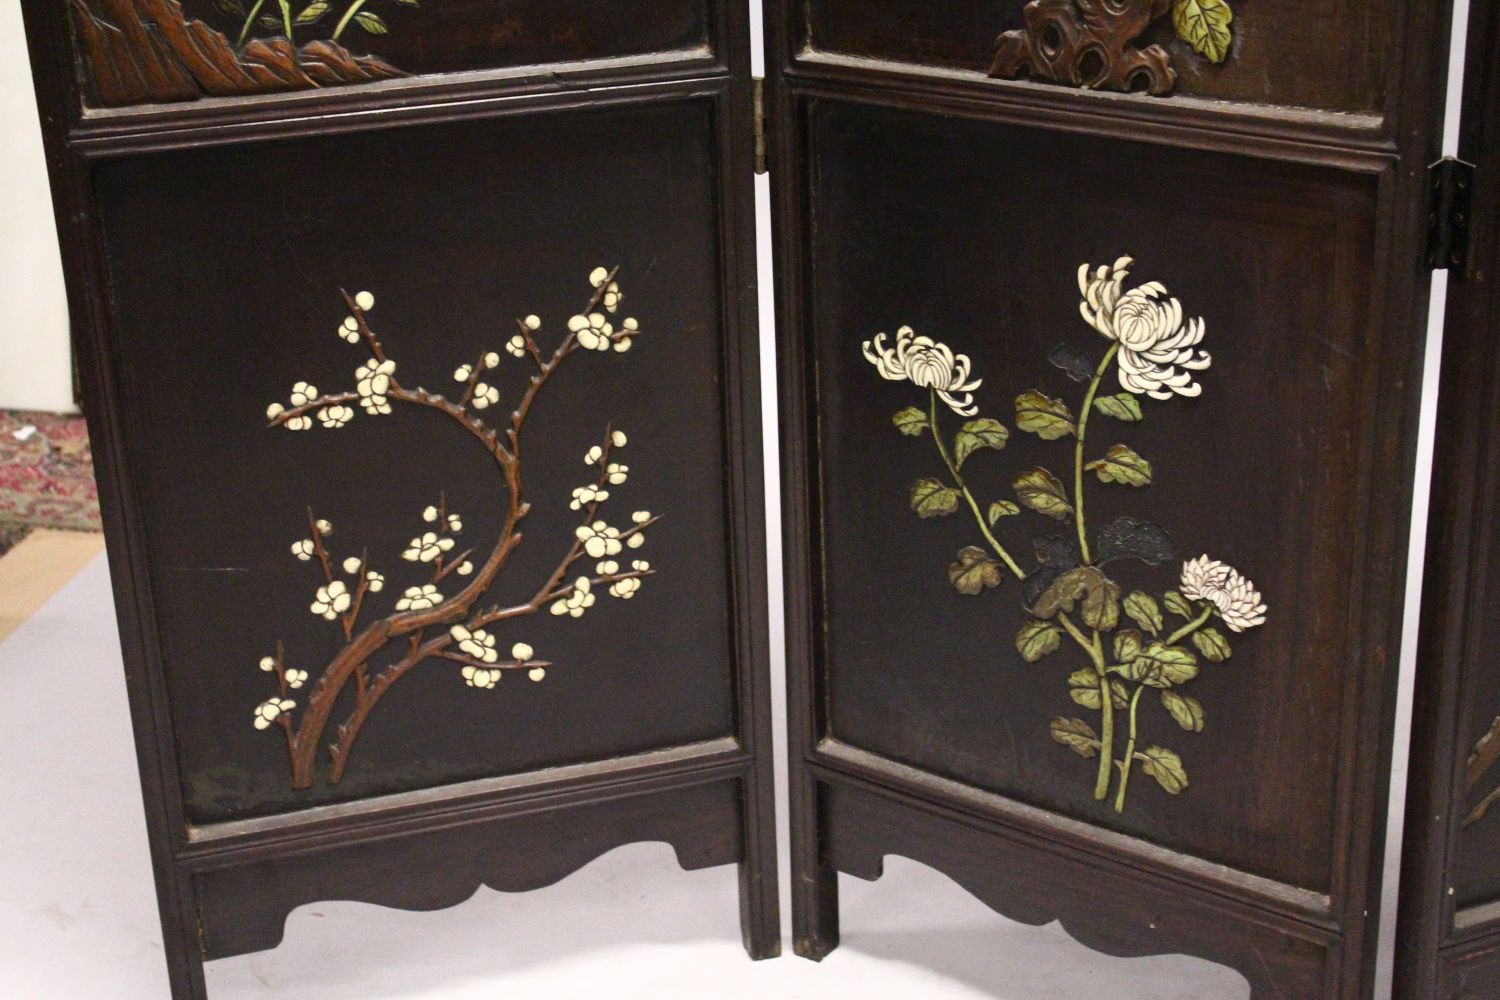 A 19TH CENTURY CHINESE HARDWOOD AND INLAID FOUR FOLD SCREEN, each panel inlaid with carved bone - Image 5 of 9